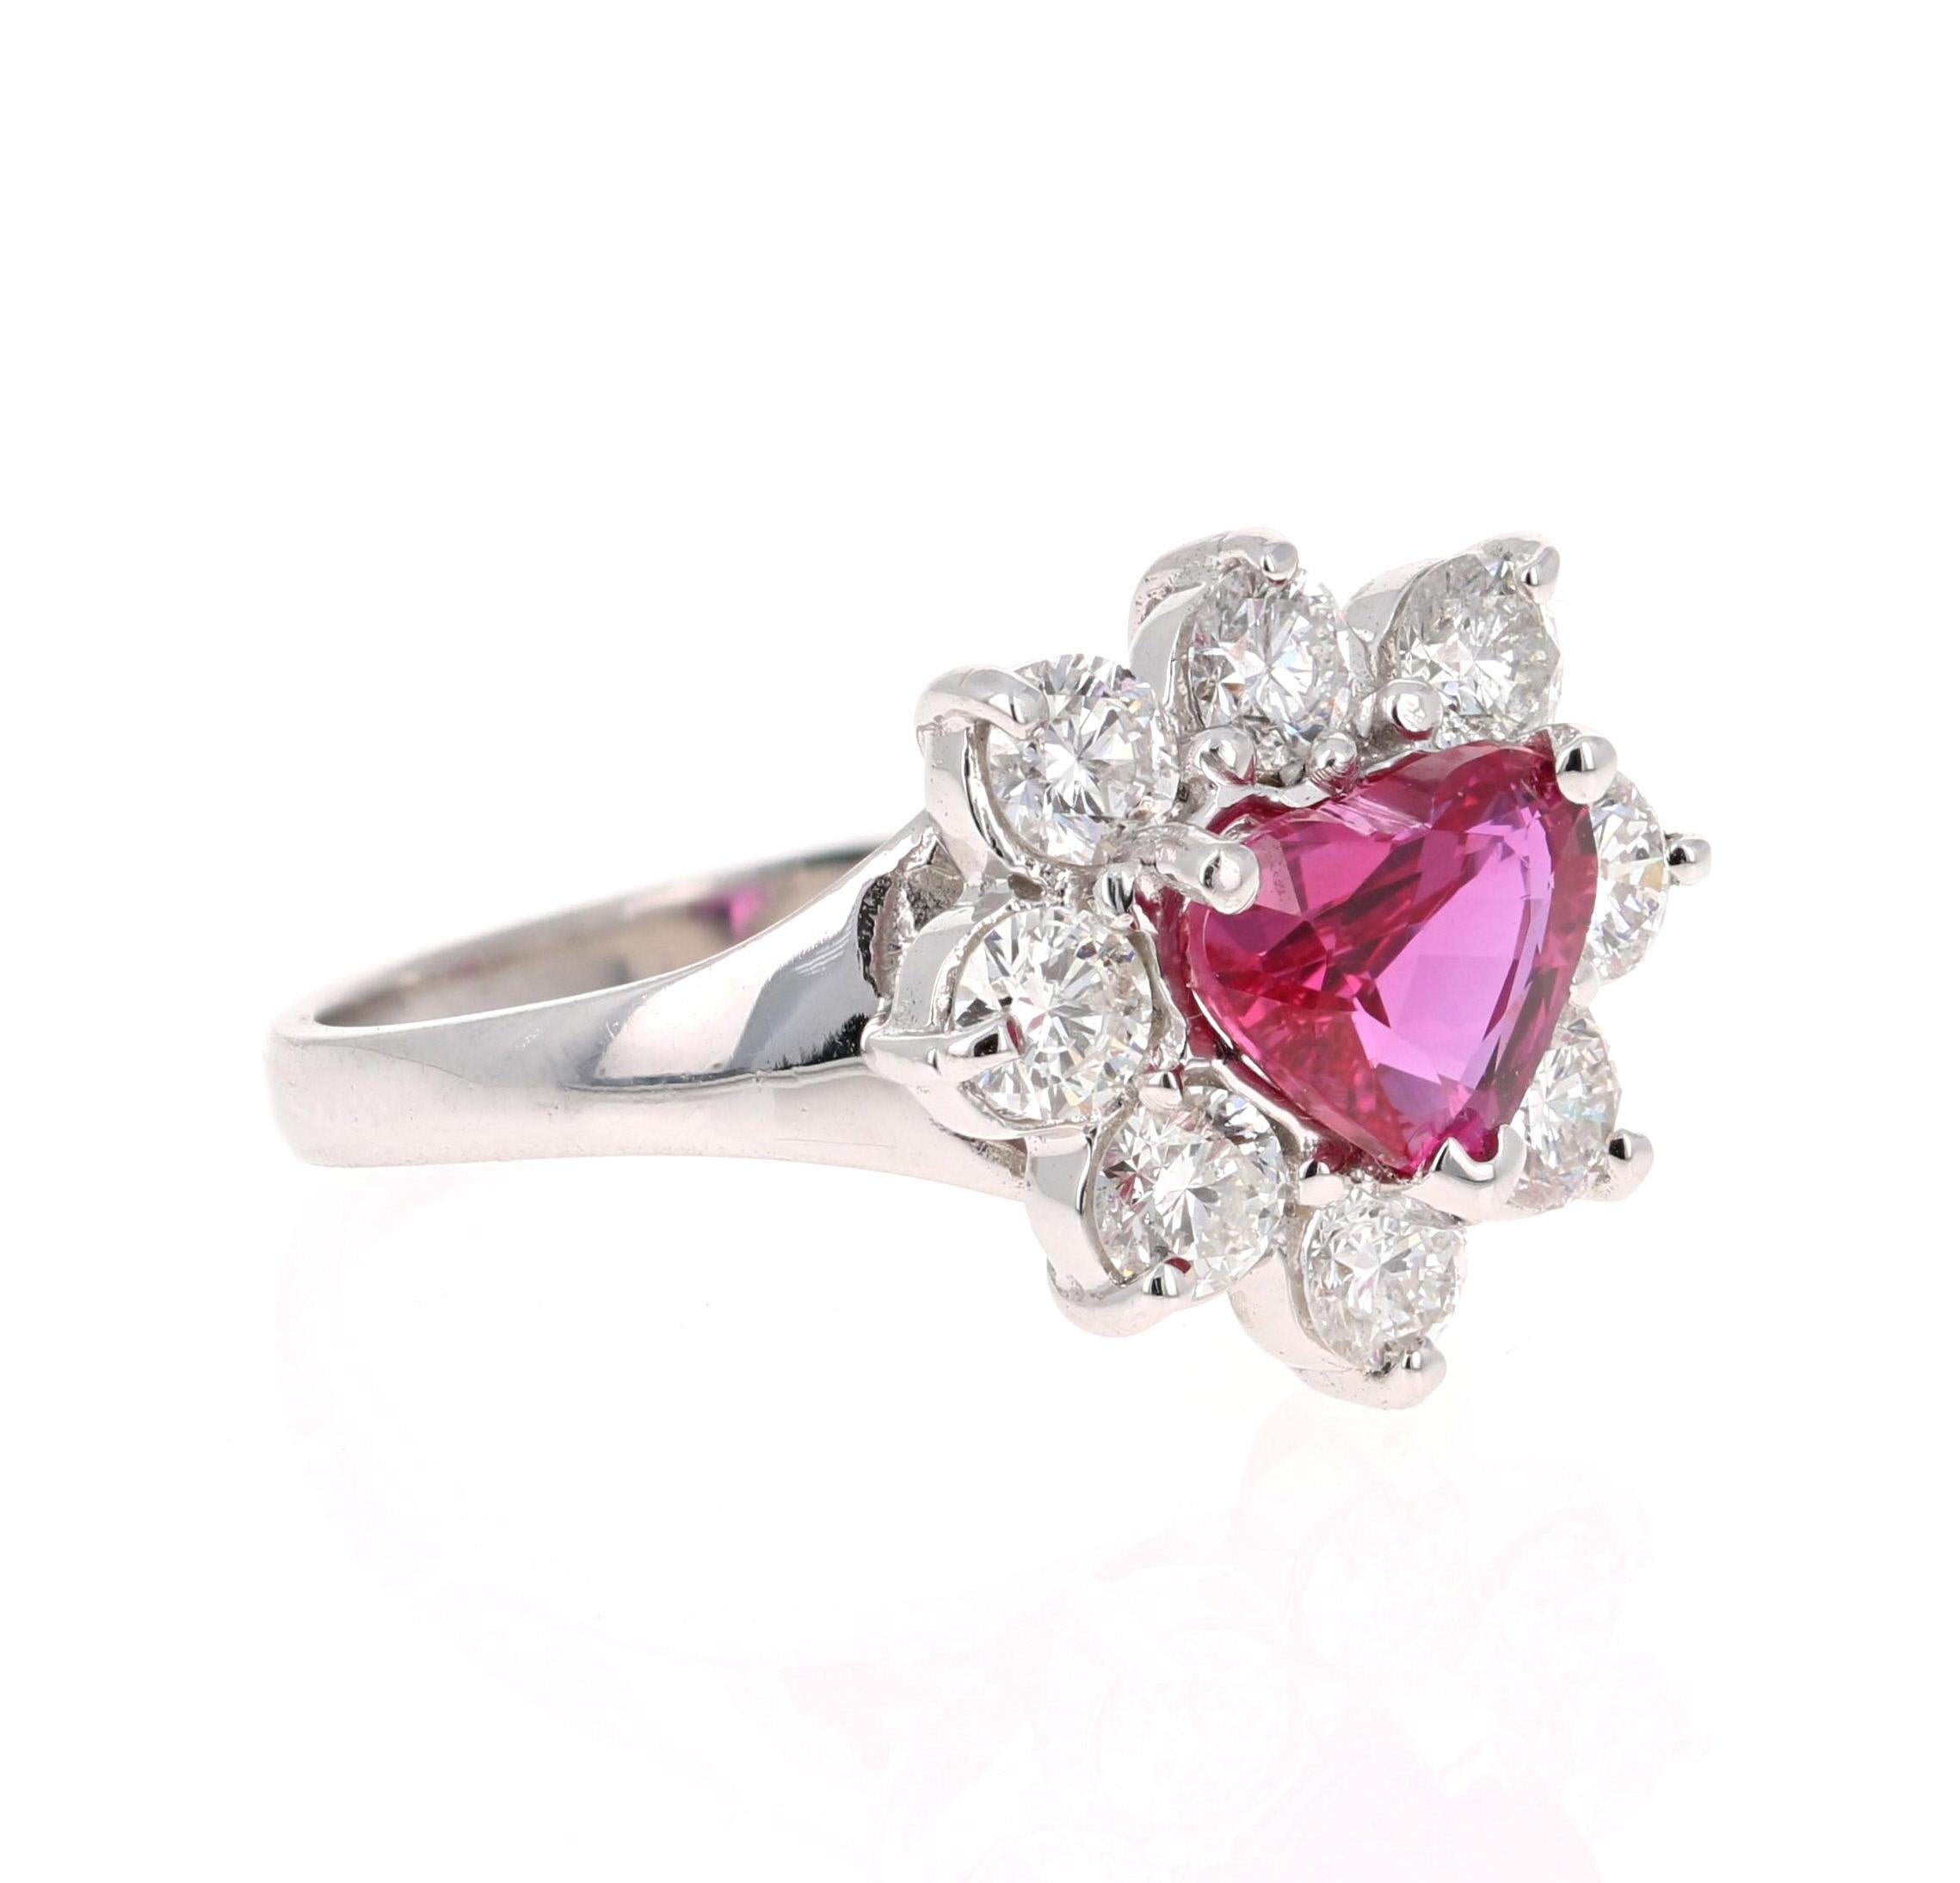 This ring has a stunning Heart Cut GIA Certified Ruby that weighs 1.72 carats.  There are 8 Round Cut Diamonds that weigh 1.17 Carats                  
 (Clarity: SI Color: F)  The total carat weight of the ring is 2.89 Carats. 

This ring is casted